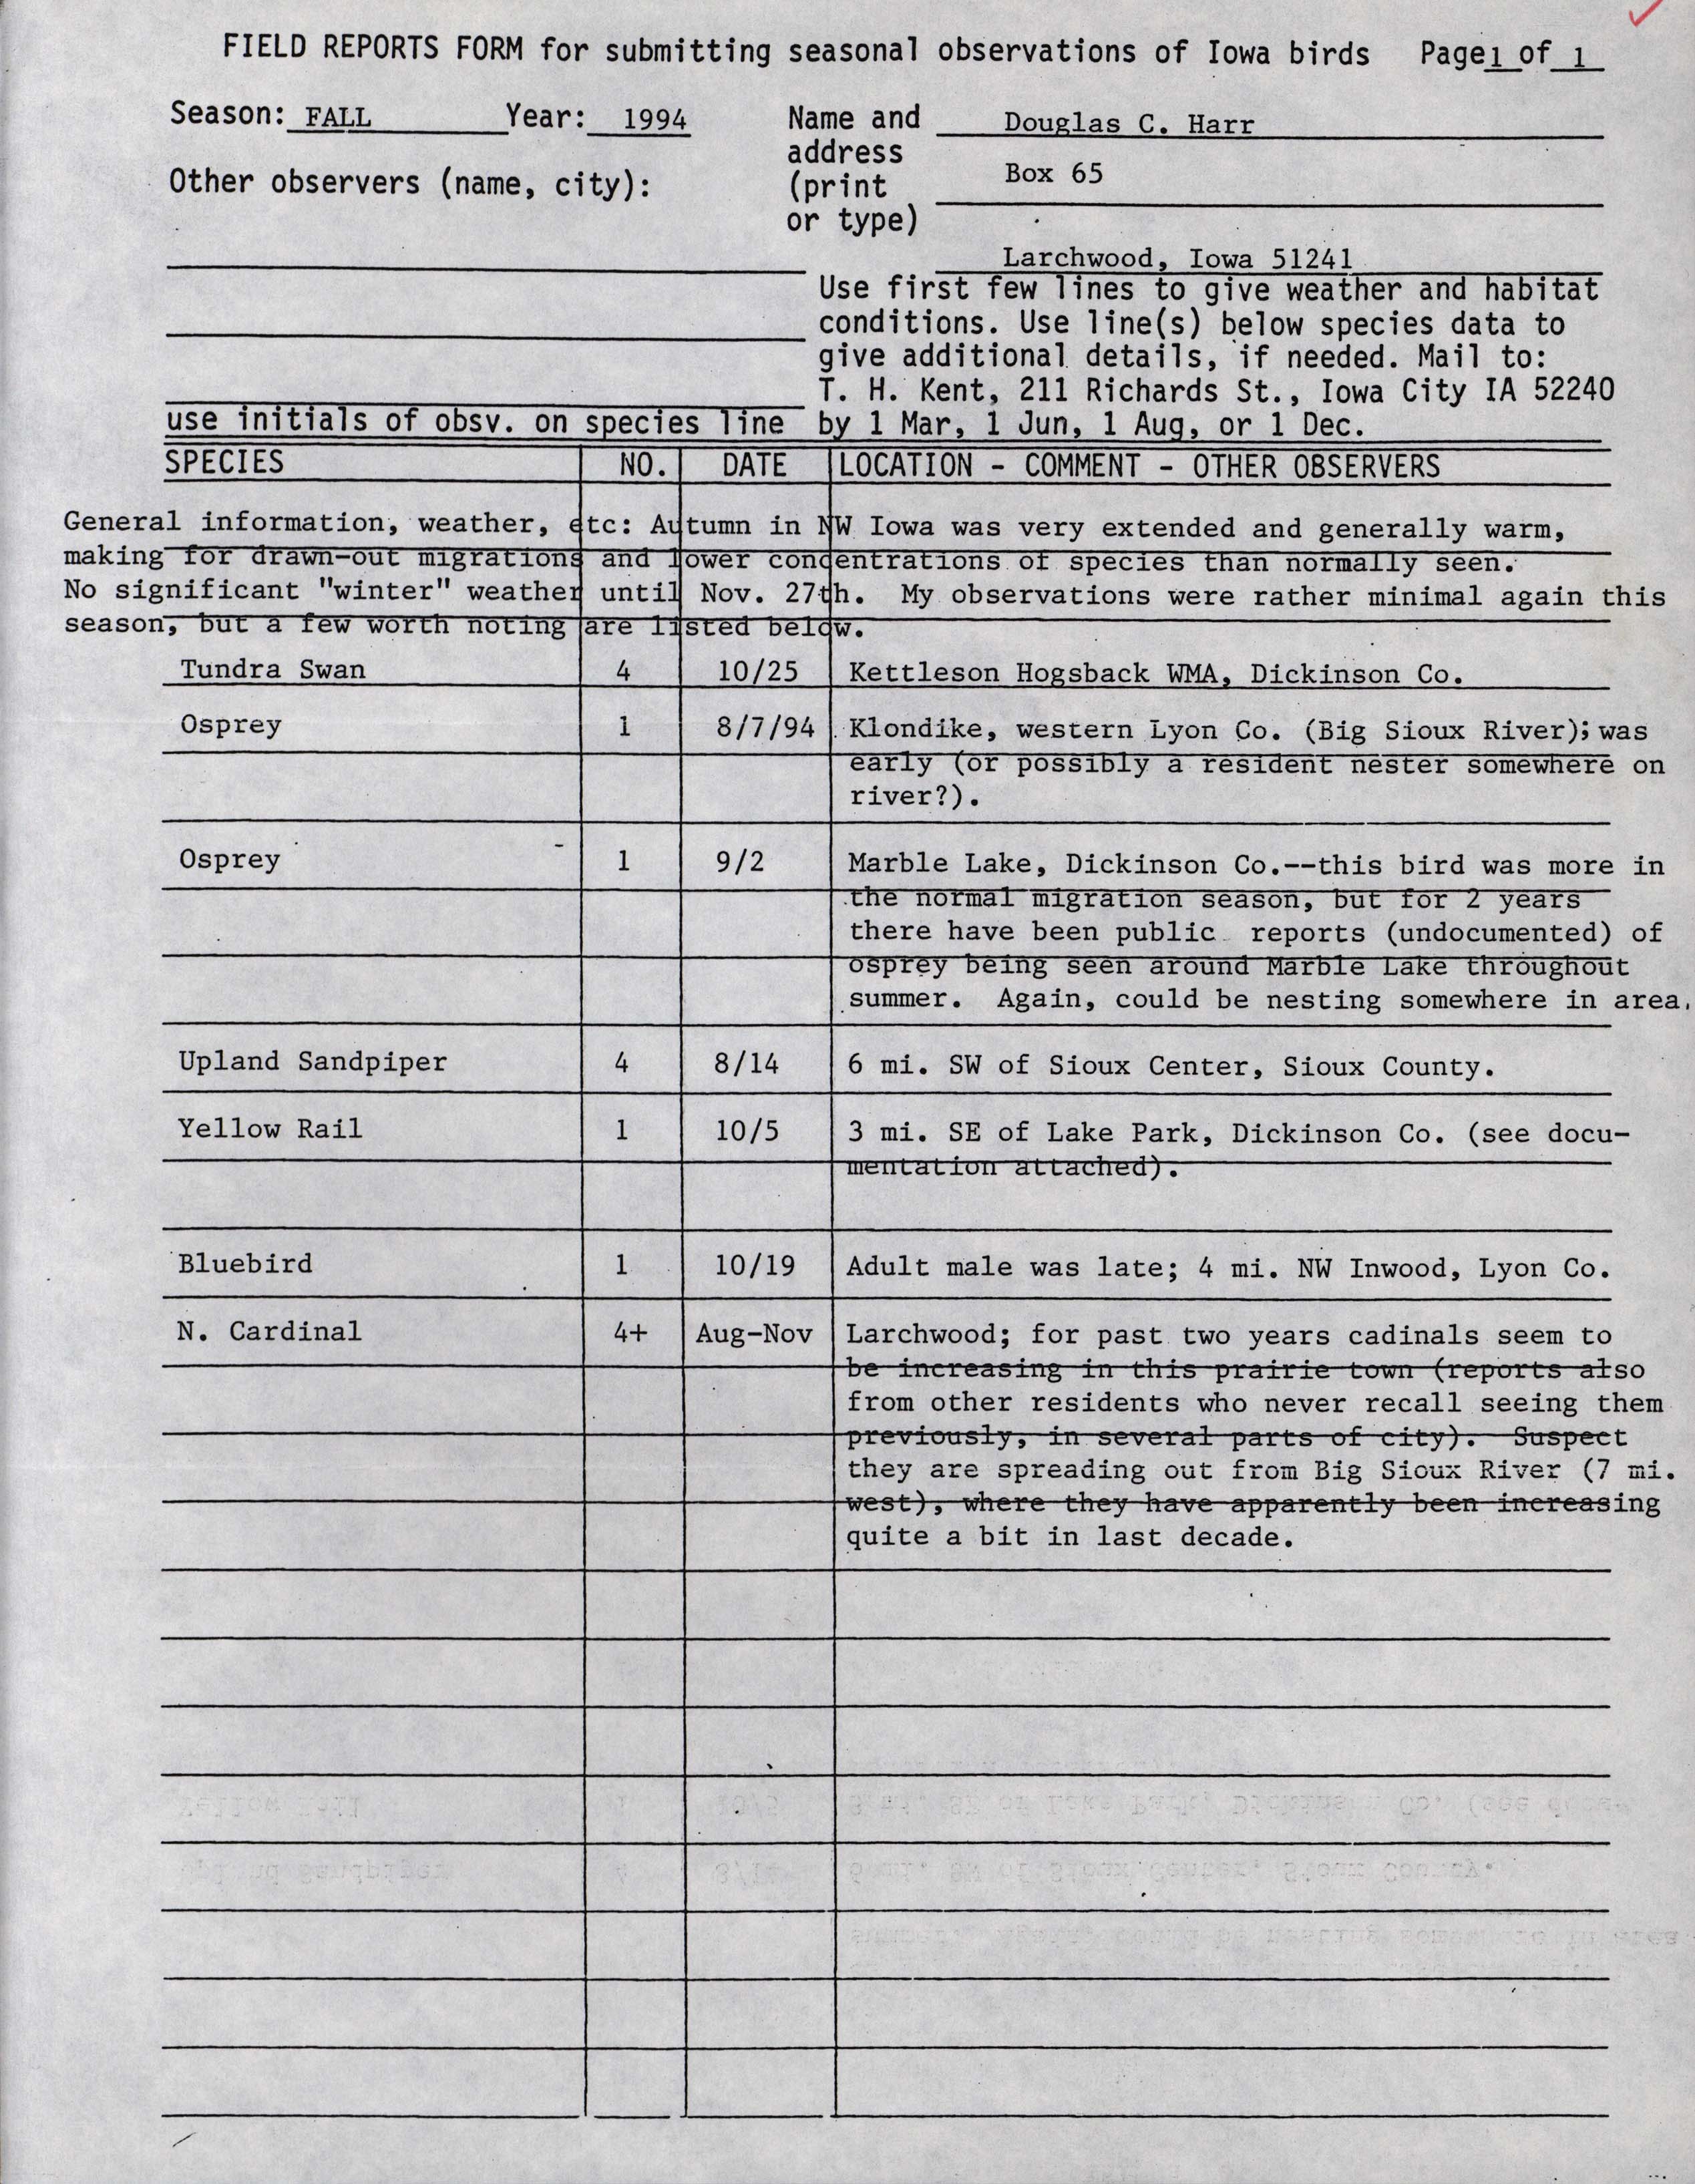 Field reports form for submitting seasonal observations of Iowa birds, Douglas Harr, fall 1994